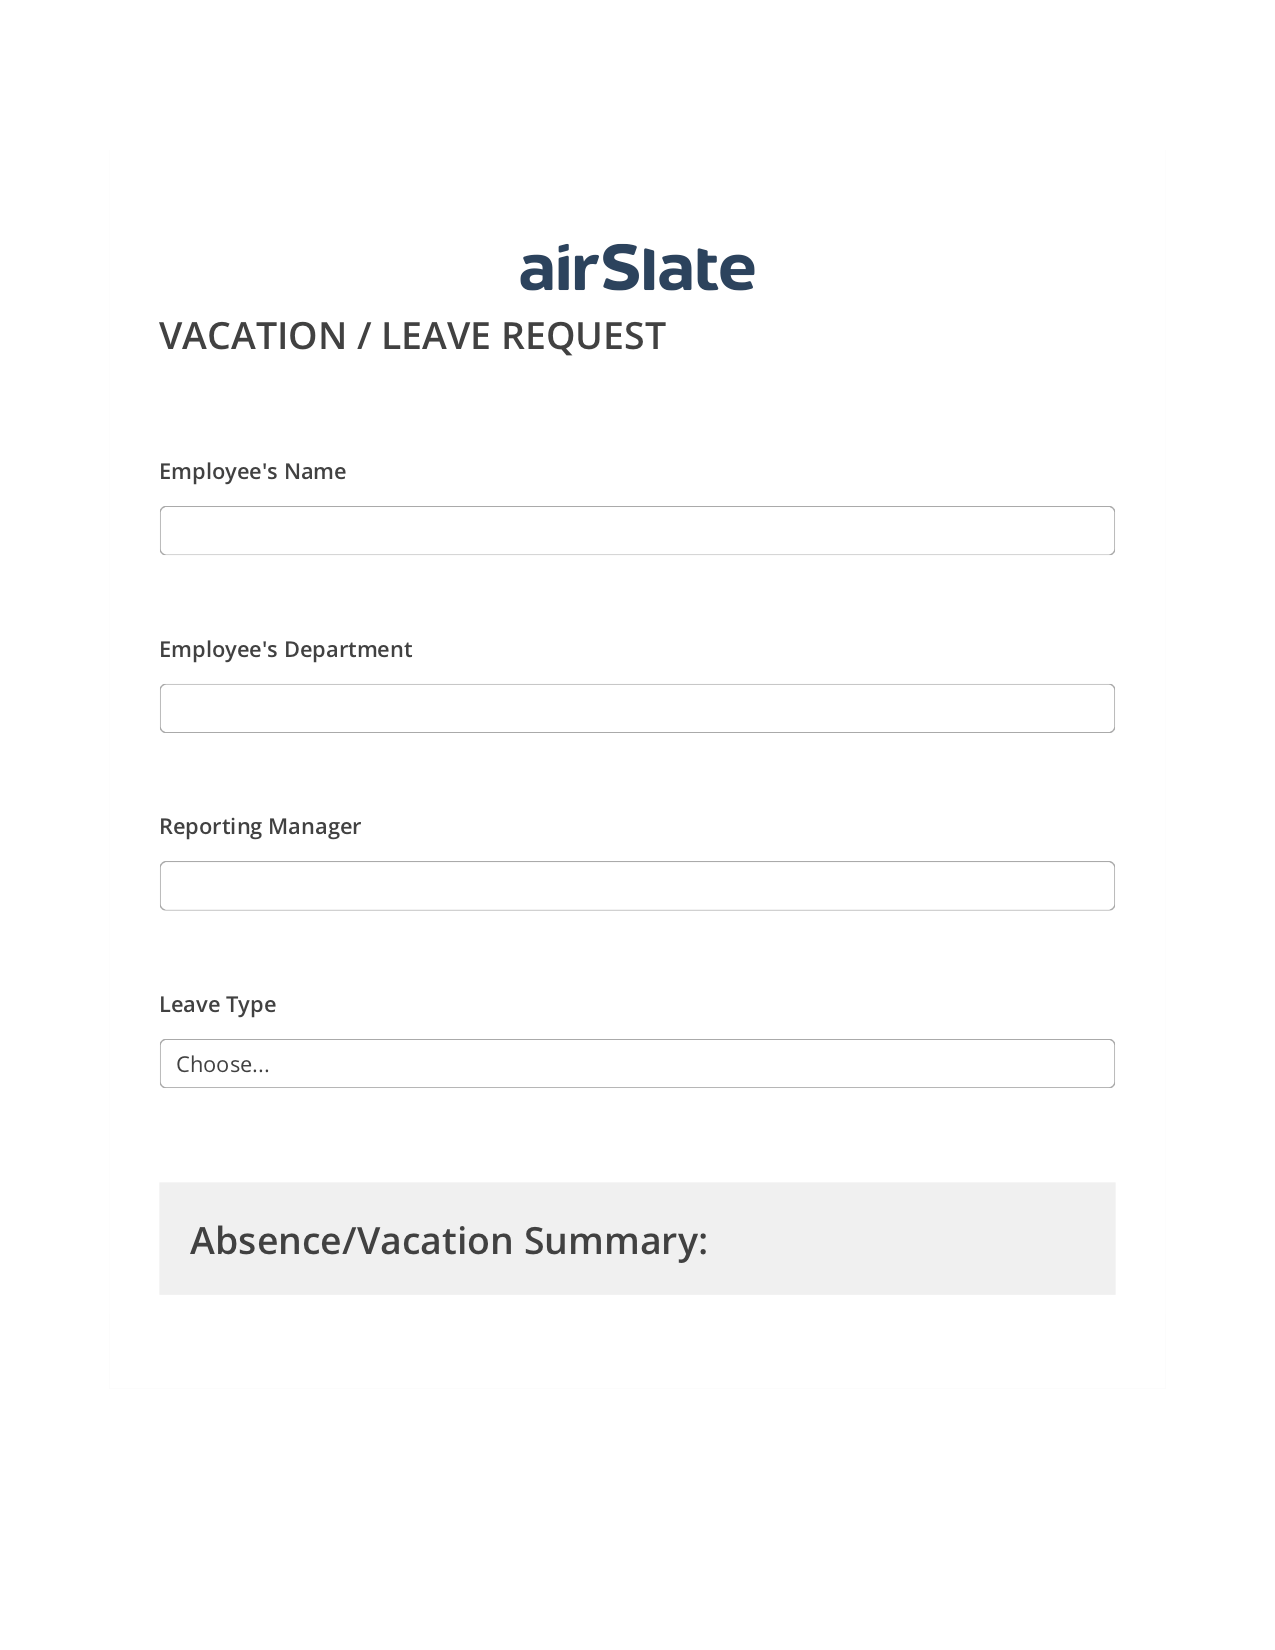 Vacation/Leave Request Workflow System Bot - Slack Two-Way Binding Bot, Lock the Slate Bot, Slack Two-Way Binding Bot